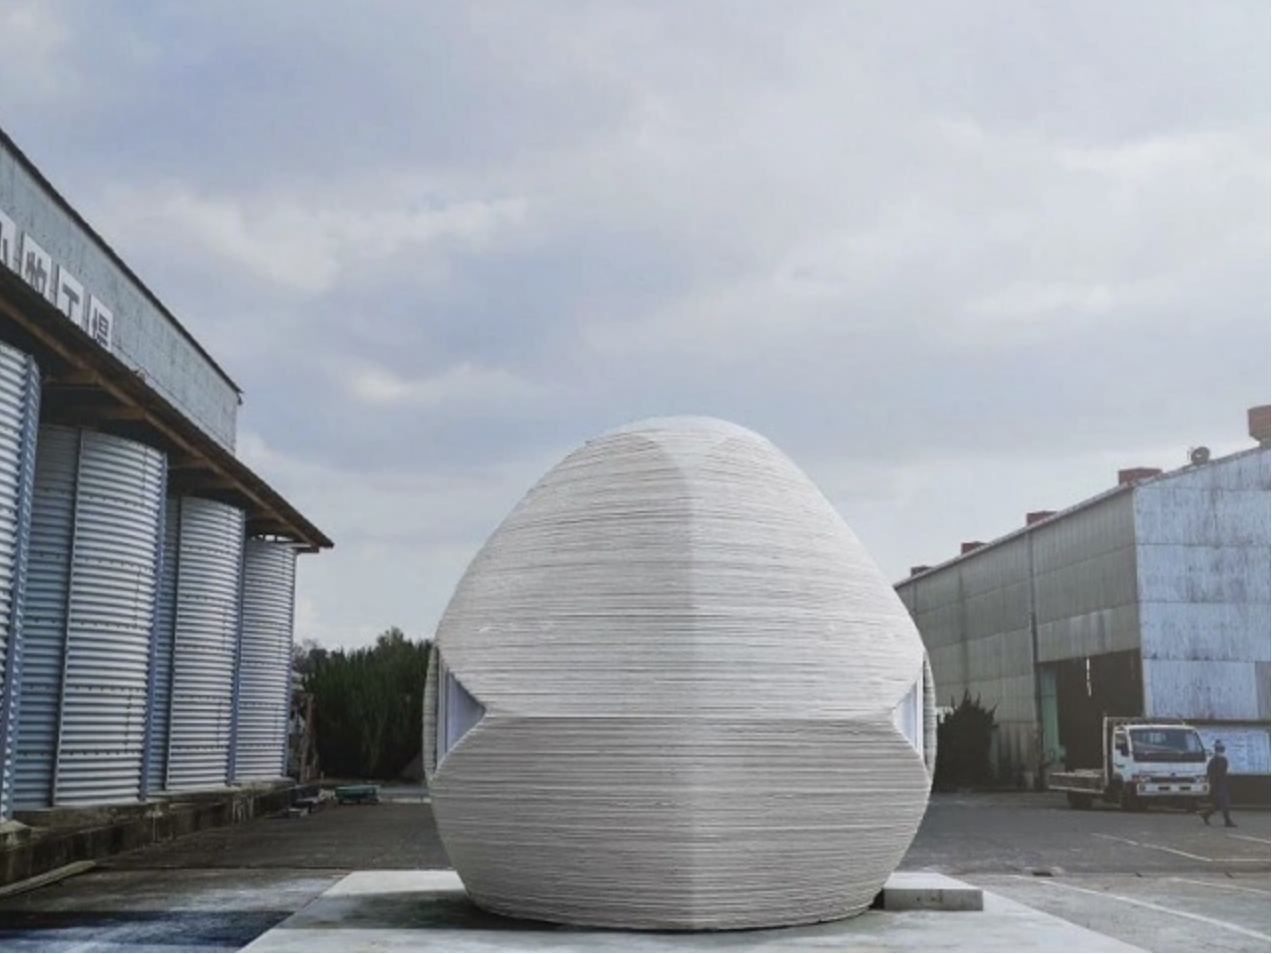 Serendix Companions 3D prints spherical dwelling in reasonably priced, futuristic dwelling first